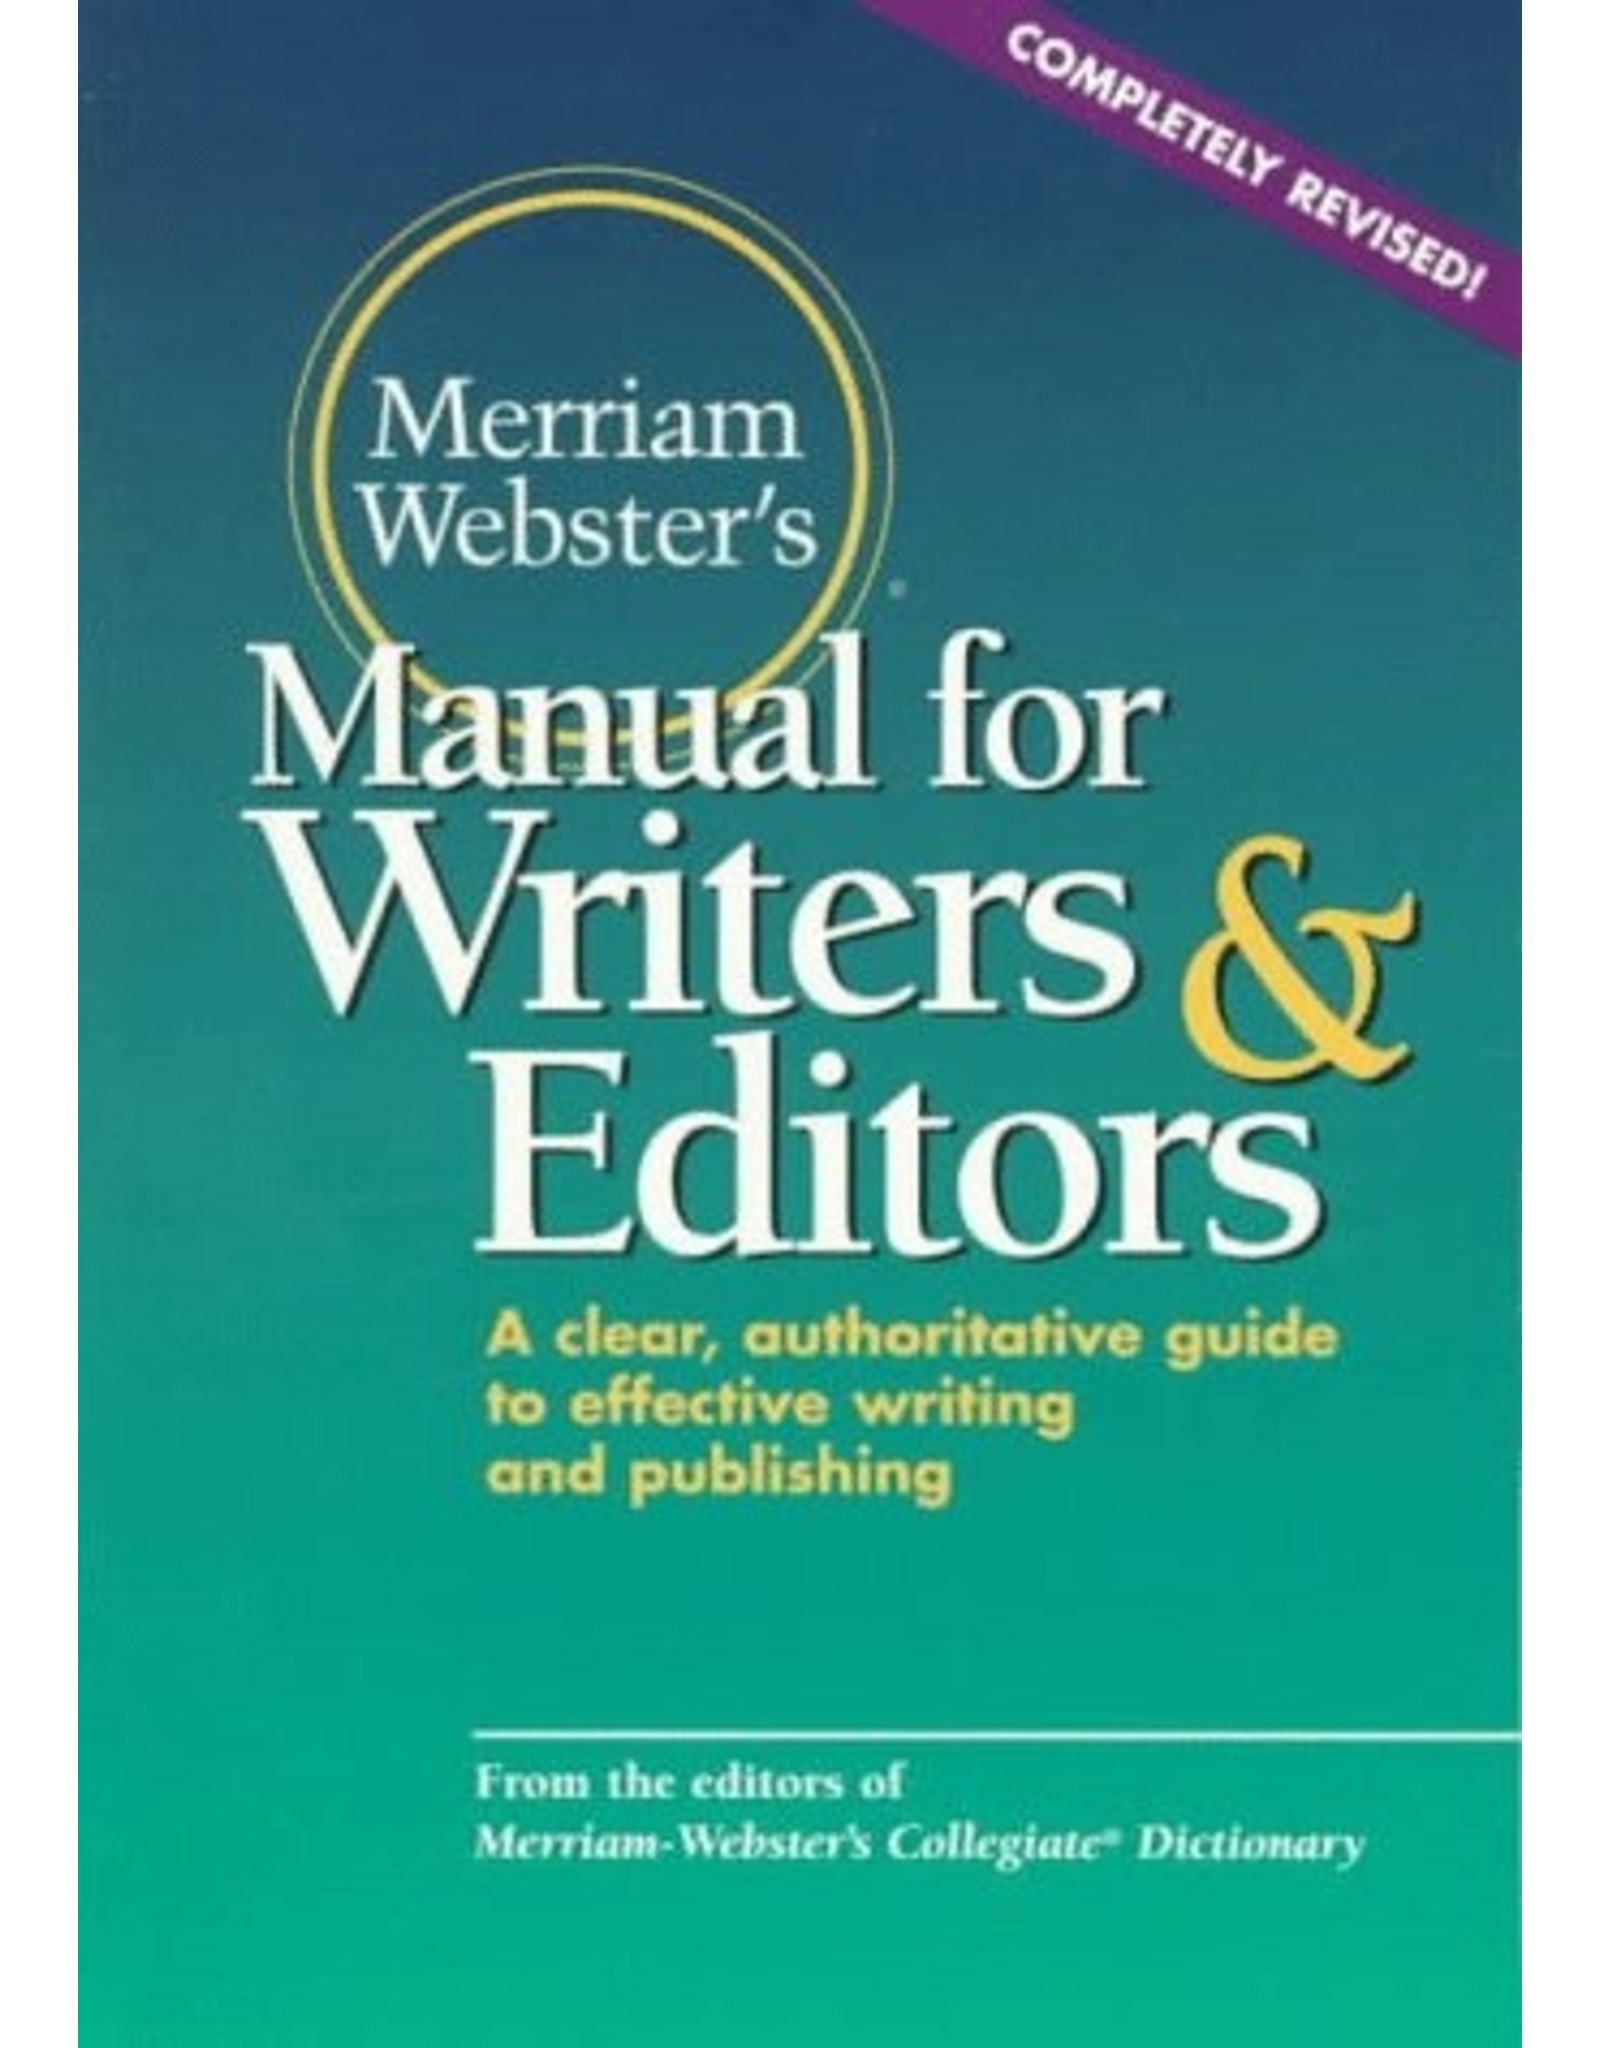 Literature Manual for Writers and Editors